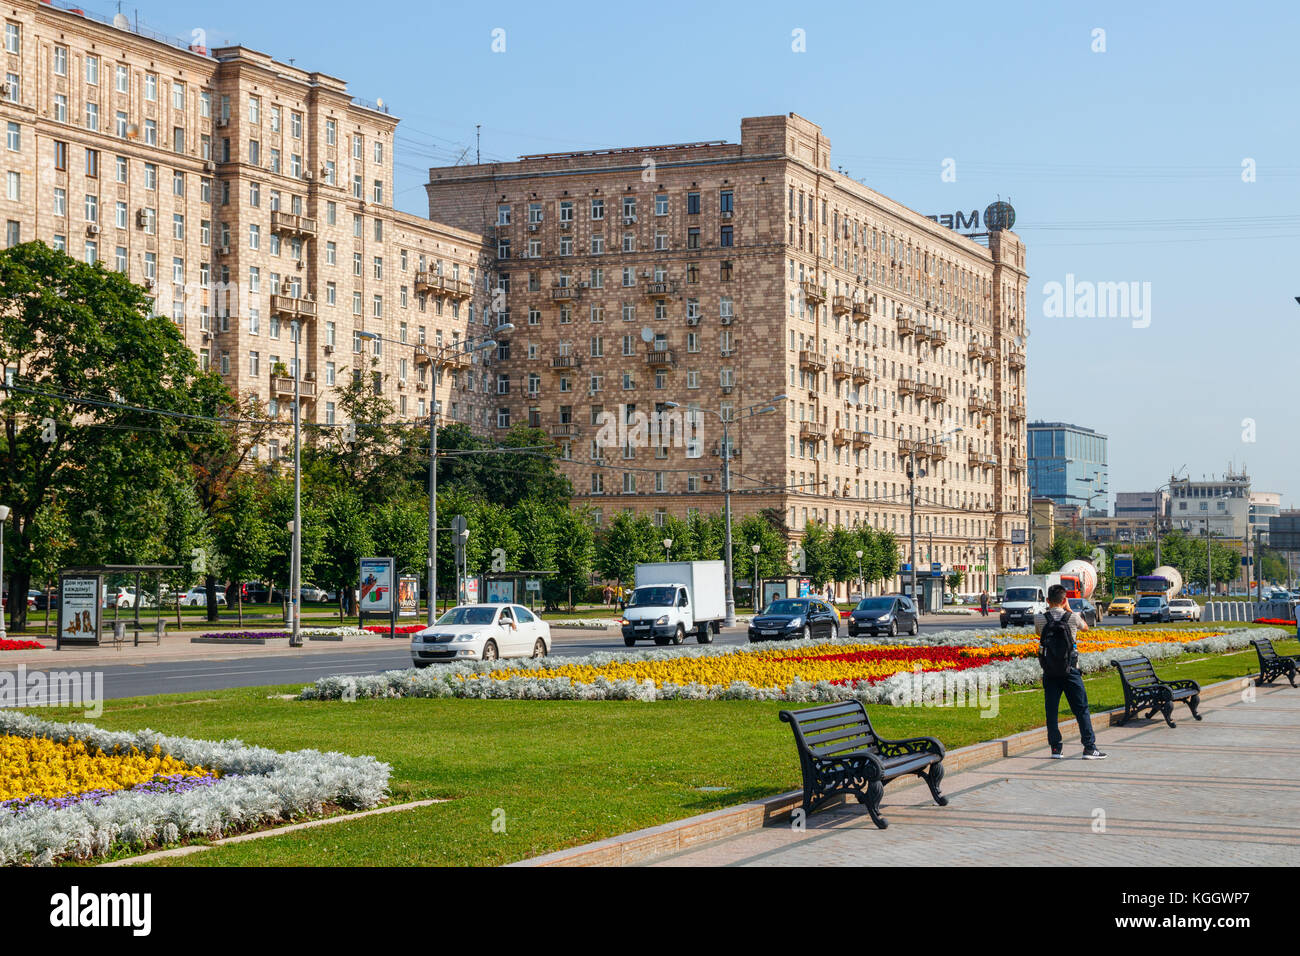 View of Kutuzovsky Prospekt with traffic and residential buildings. Moscow, Russia. Stock Photo